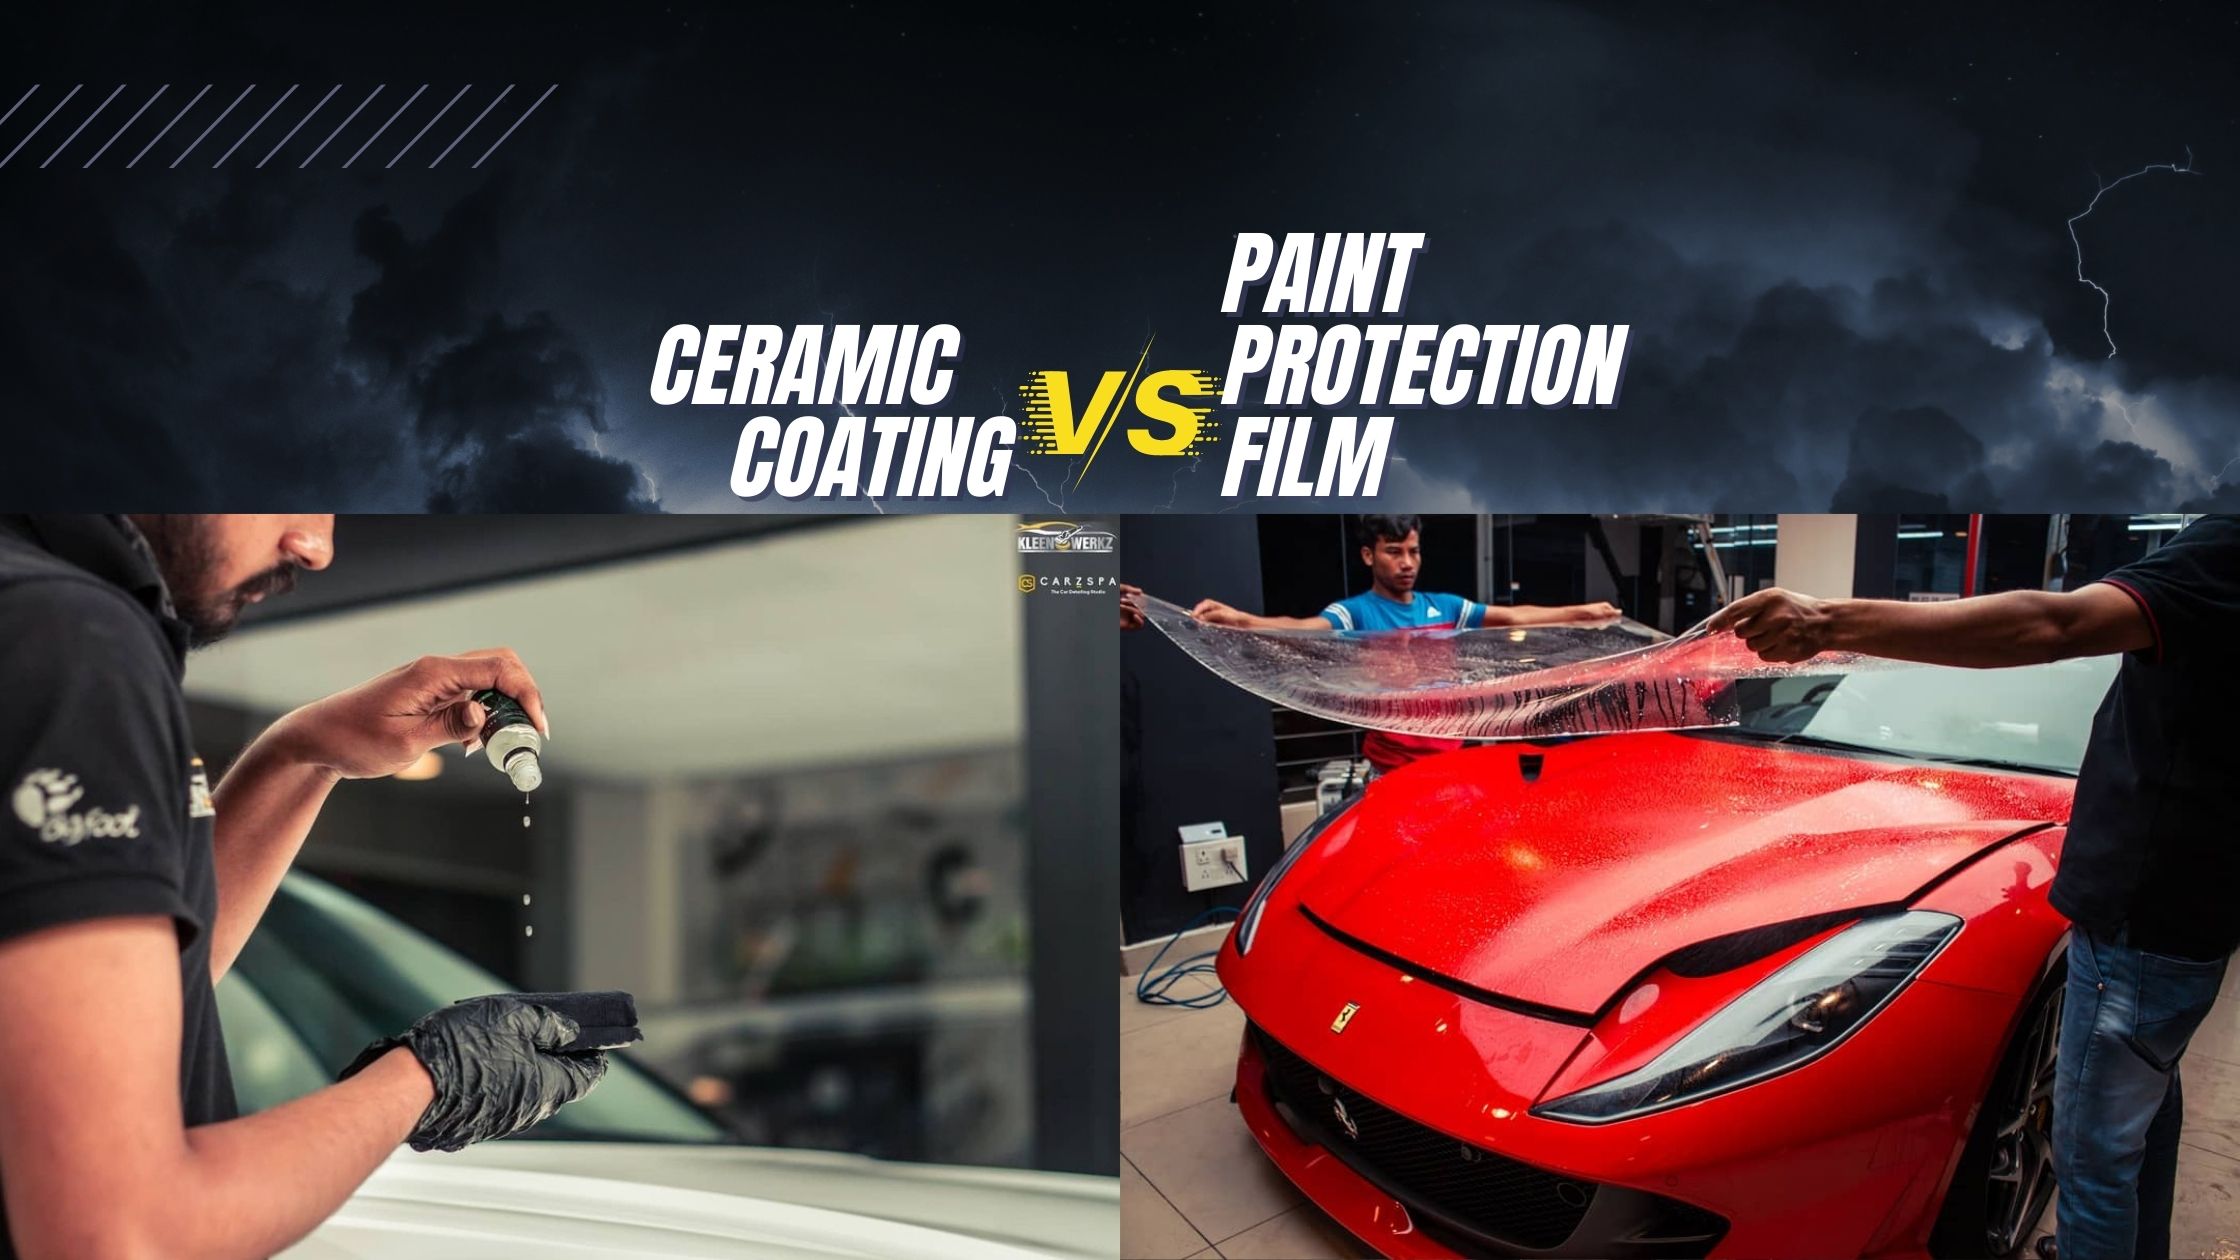 Ceramic Coating vs Paint Protection Film – What is Better?